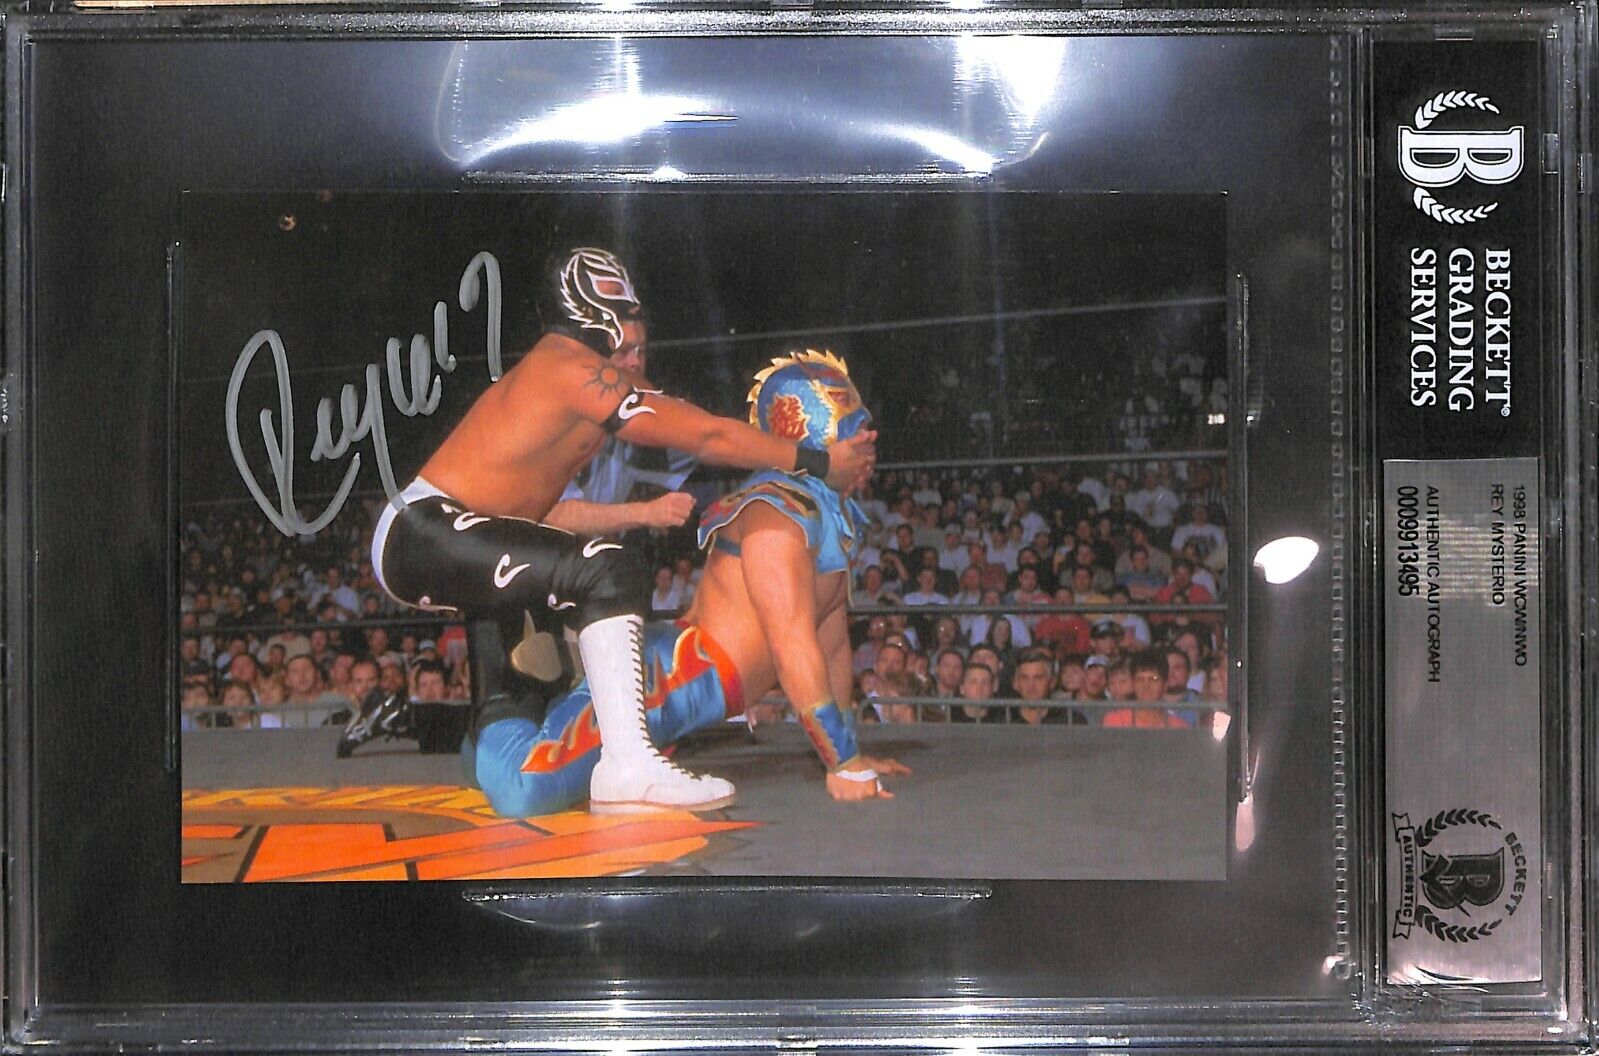 Rey Mysterio Signed 1998 Panini WCW NWO 4x6 Photo Poster painting Rookie Card #94 BAS COA RC WWE